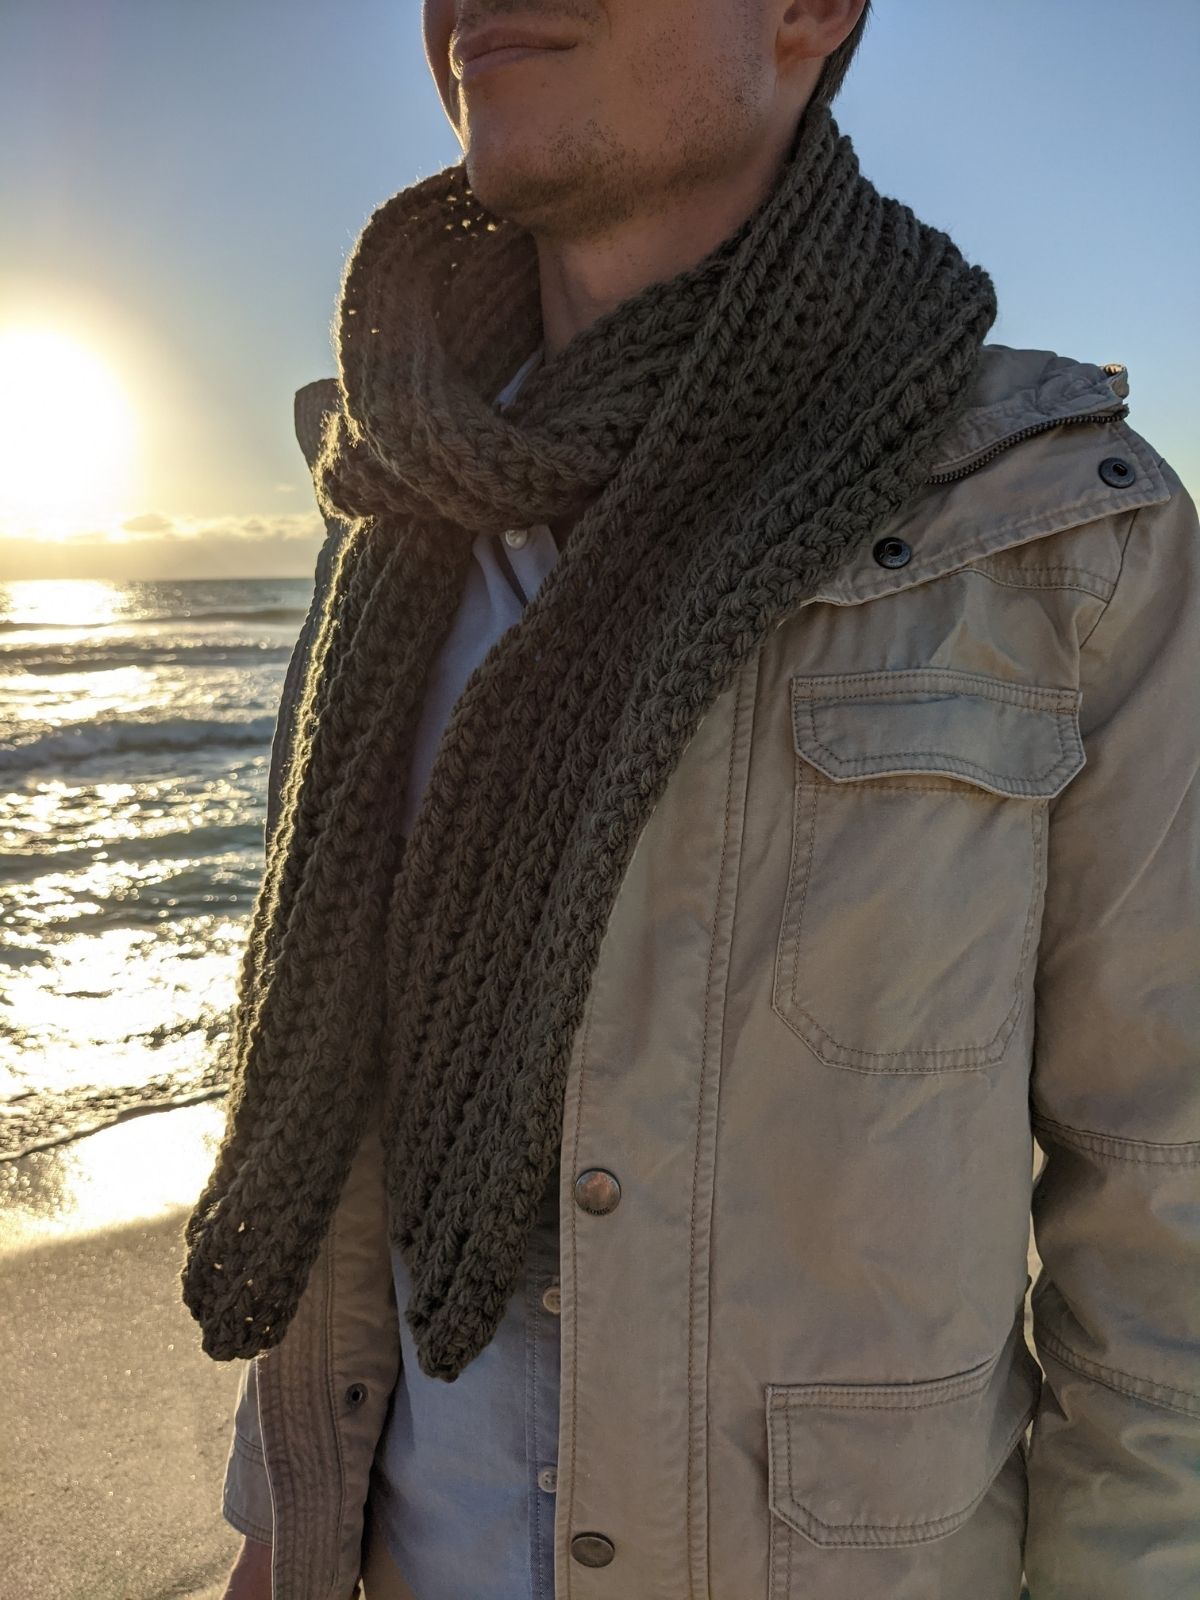 Gentleman is wearing a ribbed crochet scarf that is wrapped around his neck. 